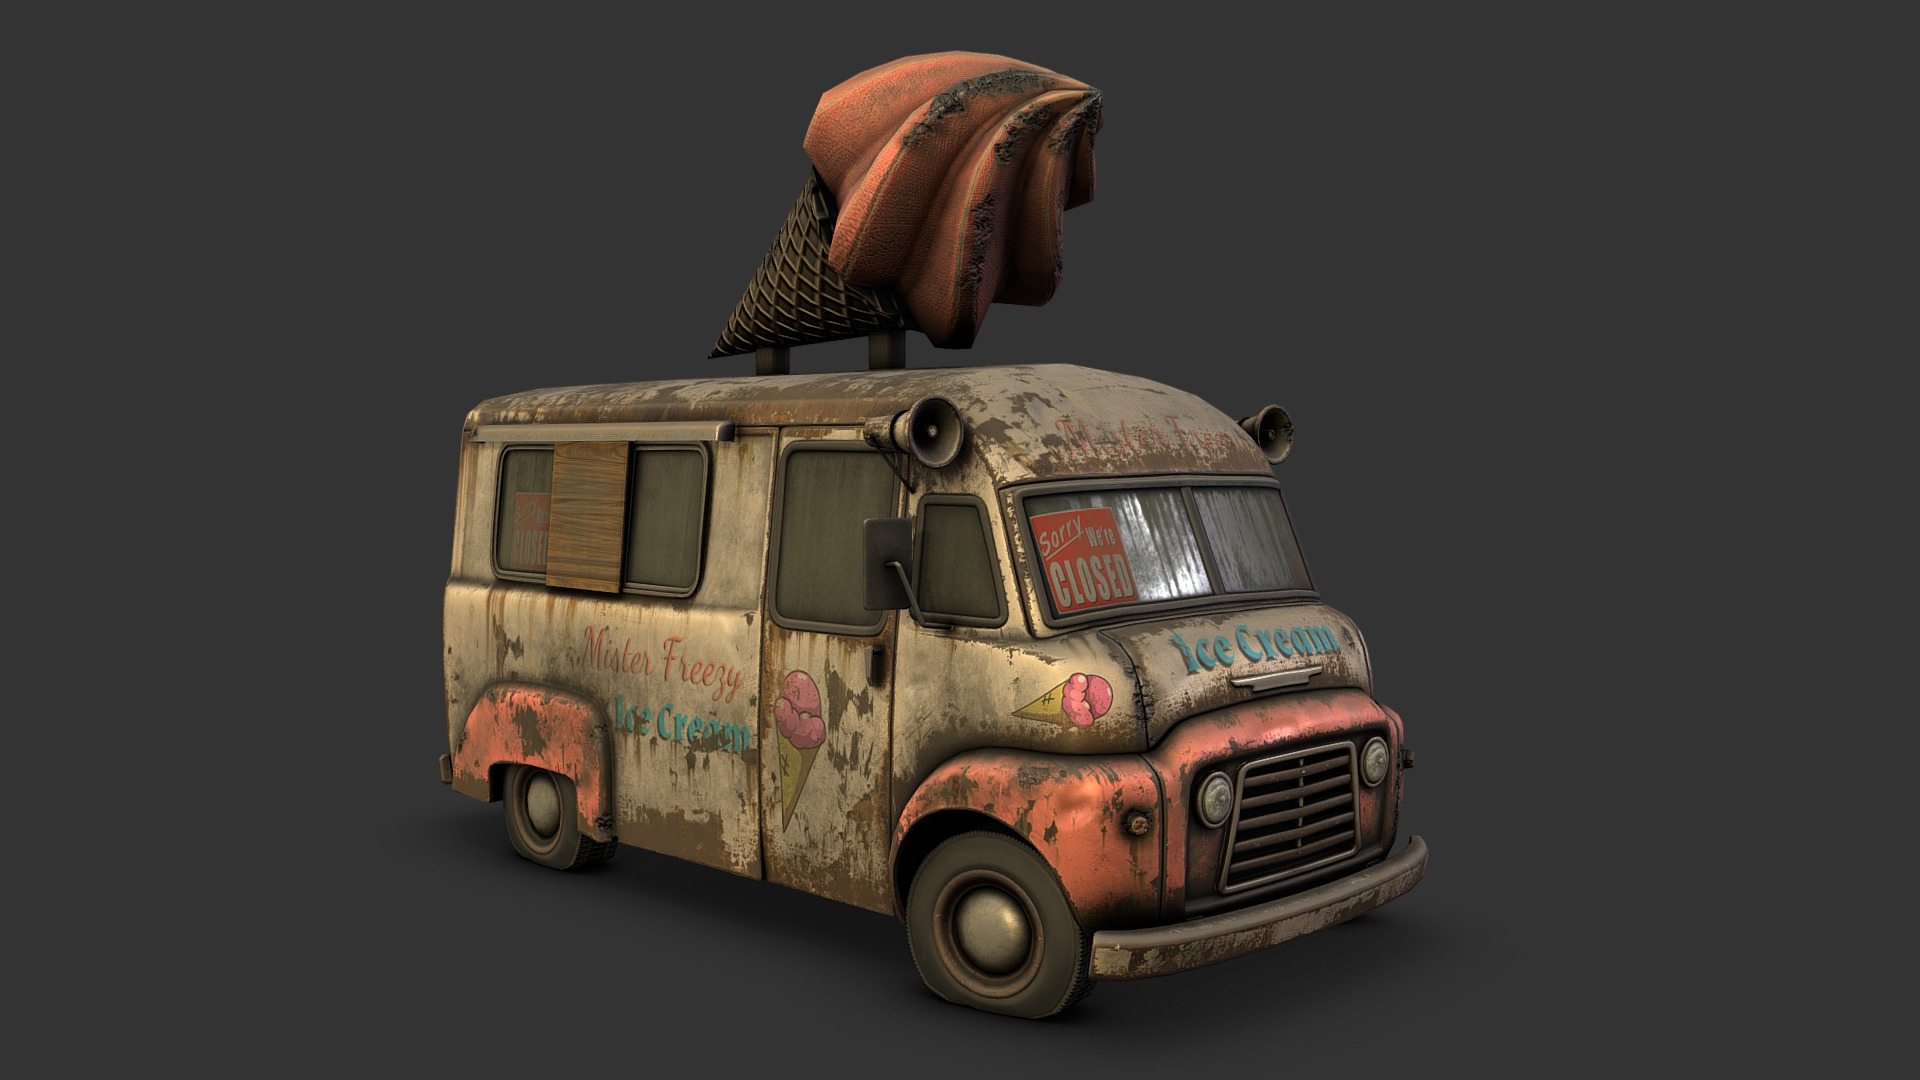 3D model Icecream Truck Challenge – Nuked Ice Cream Truck - This is a 3D model of the Icecream Truck Challenge - Nuked Ice Cream Truck. The 3D model is about a toy bus with a hat on top.